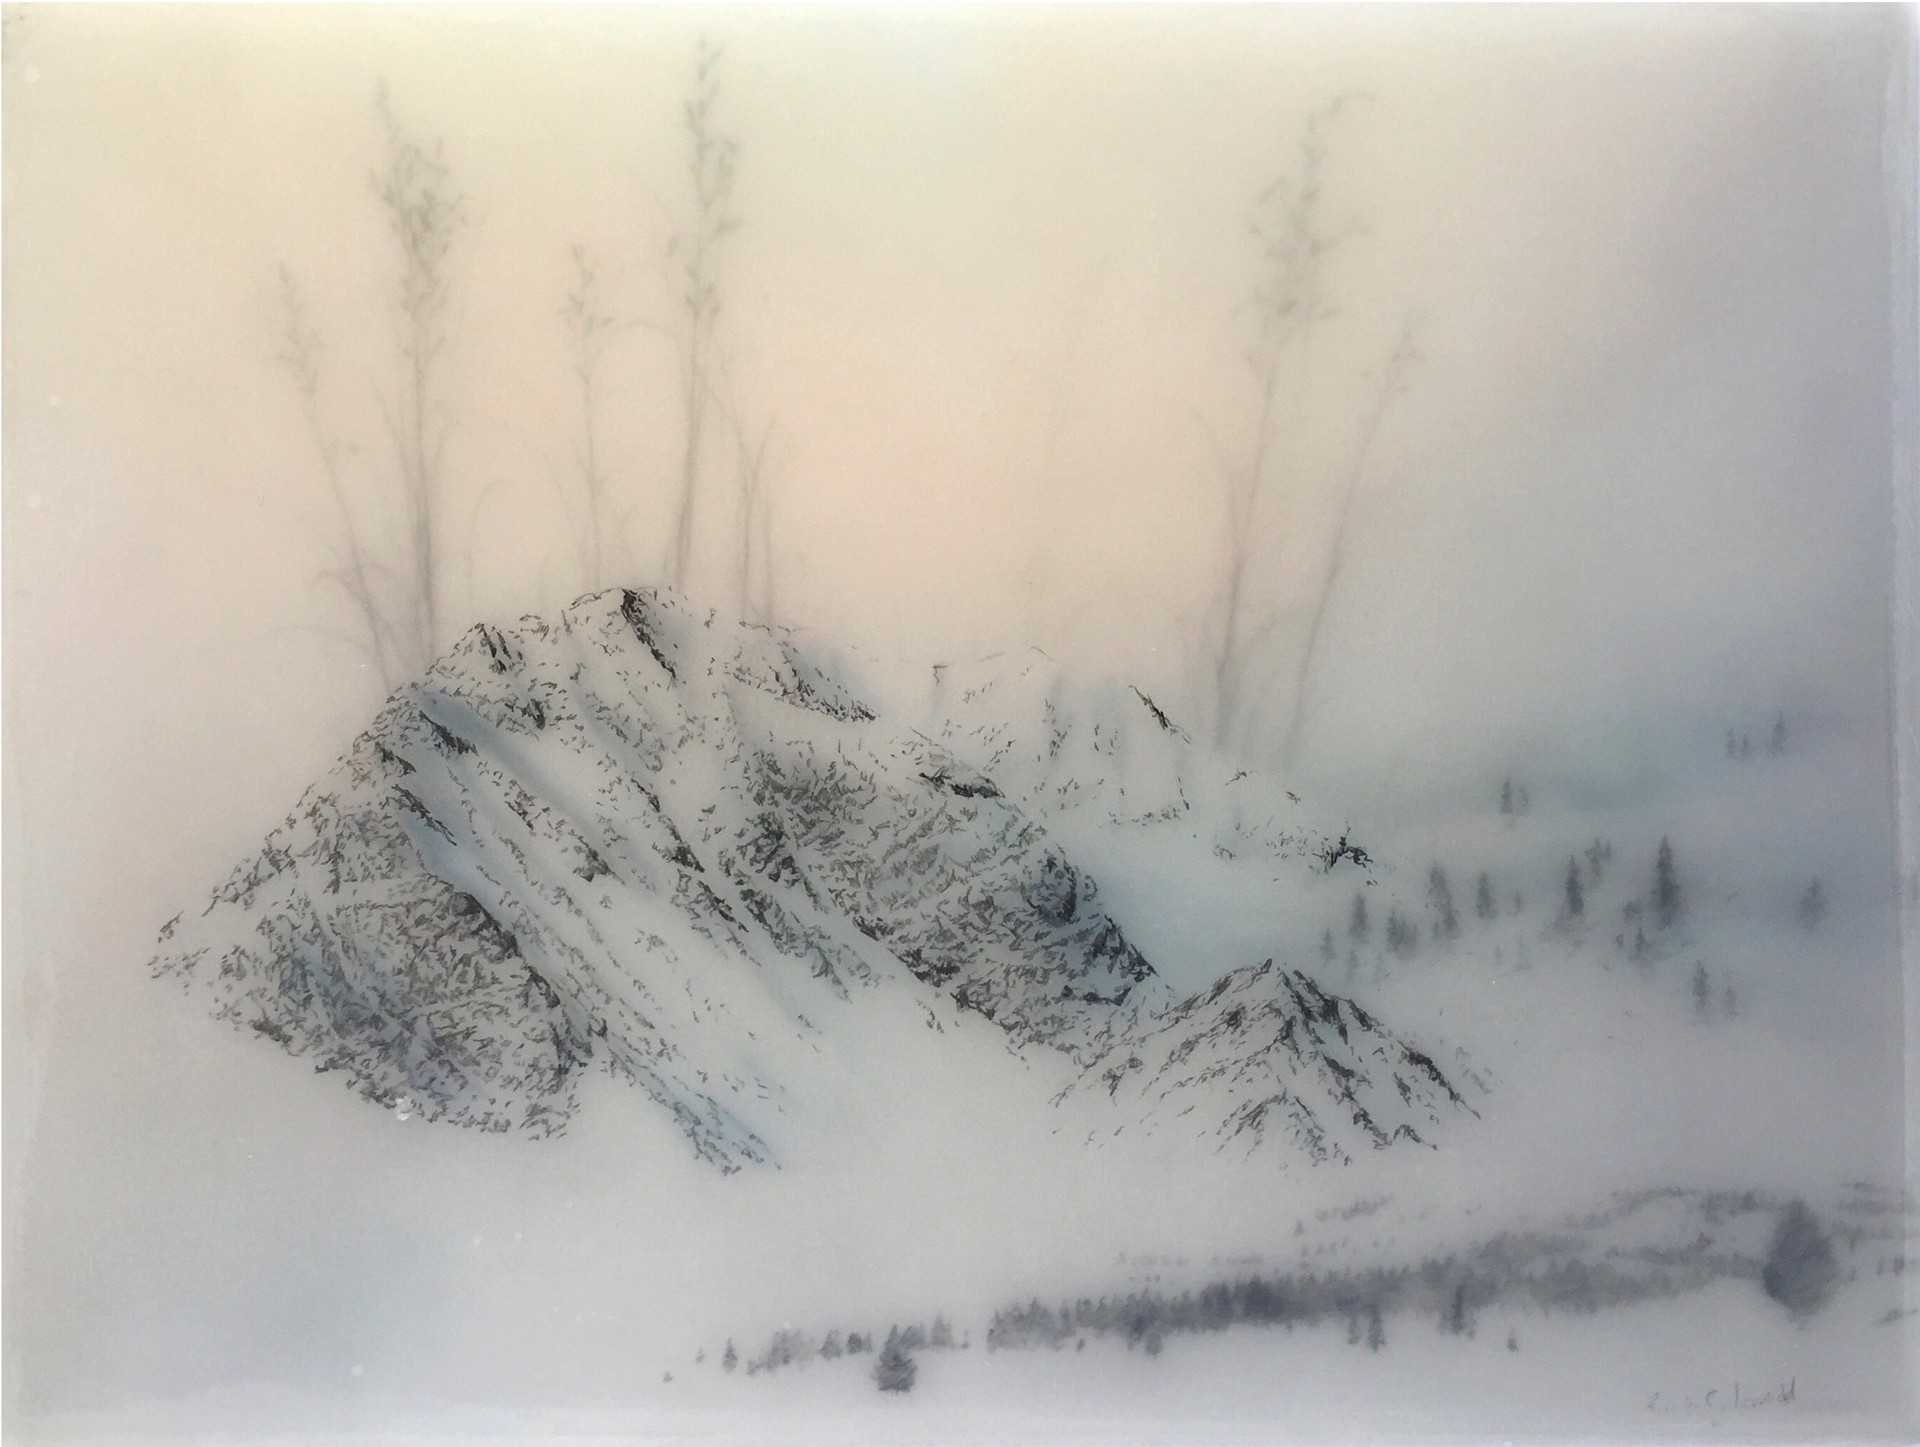 Long Grass and Blue Mountain by Brooks Salzwedel